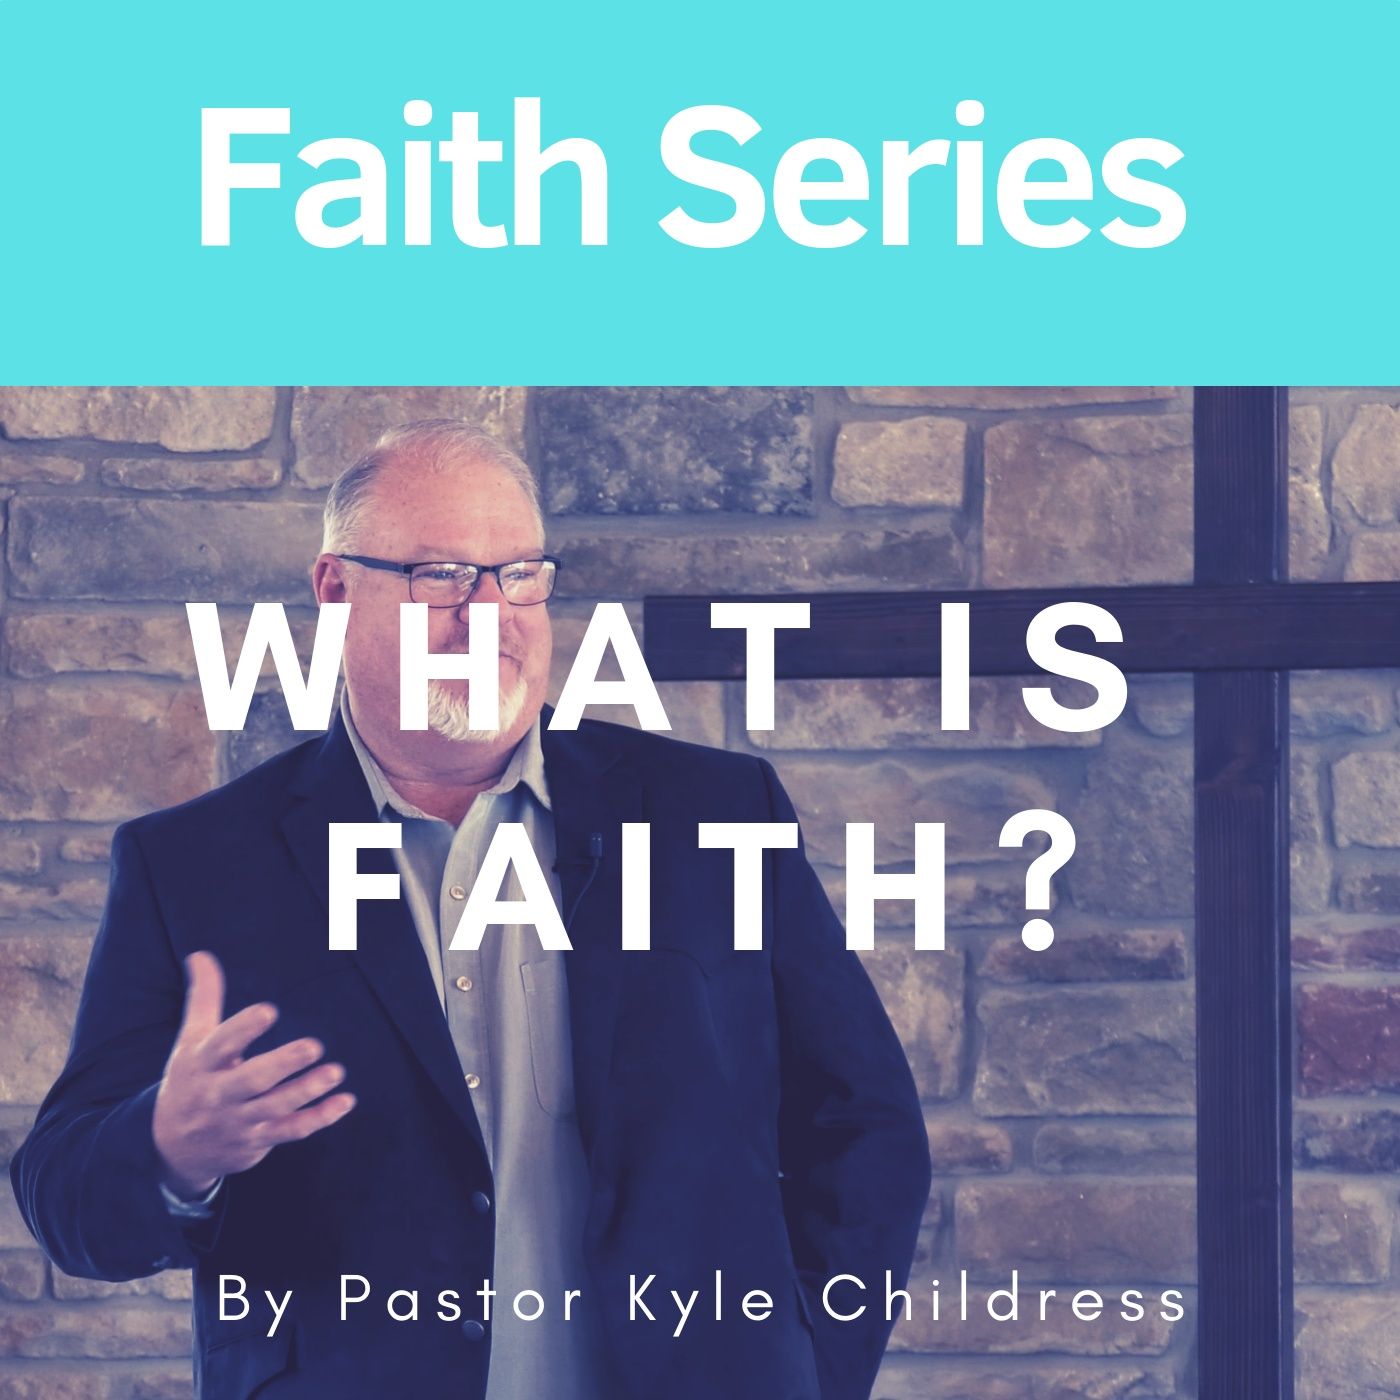 Where does it come from? By Pastor Kyle Childress